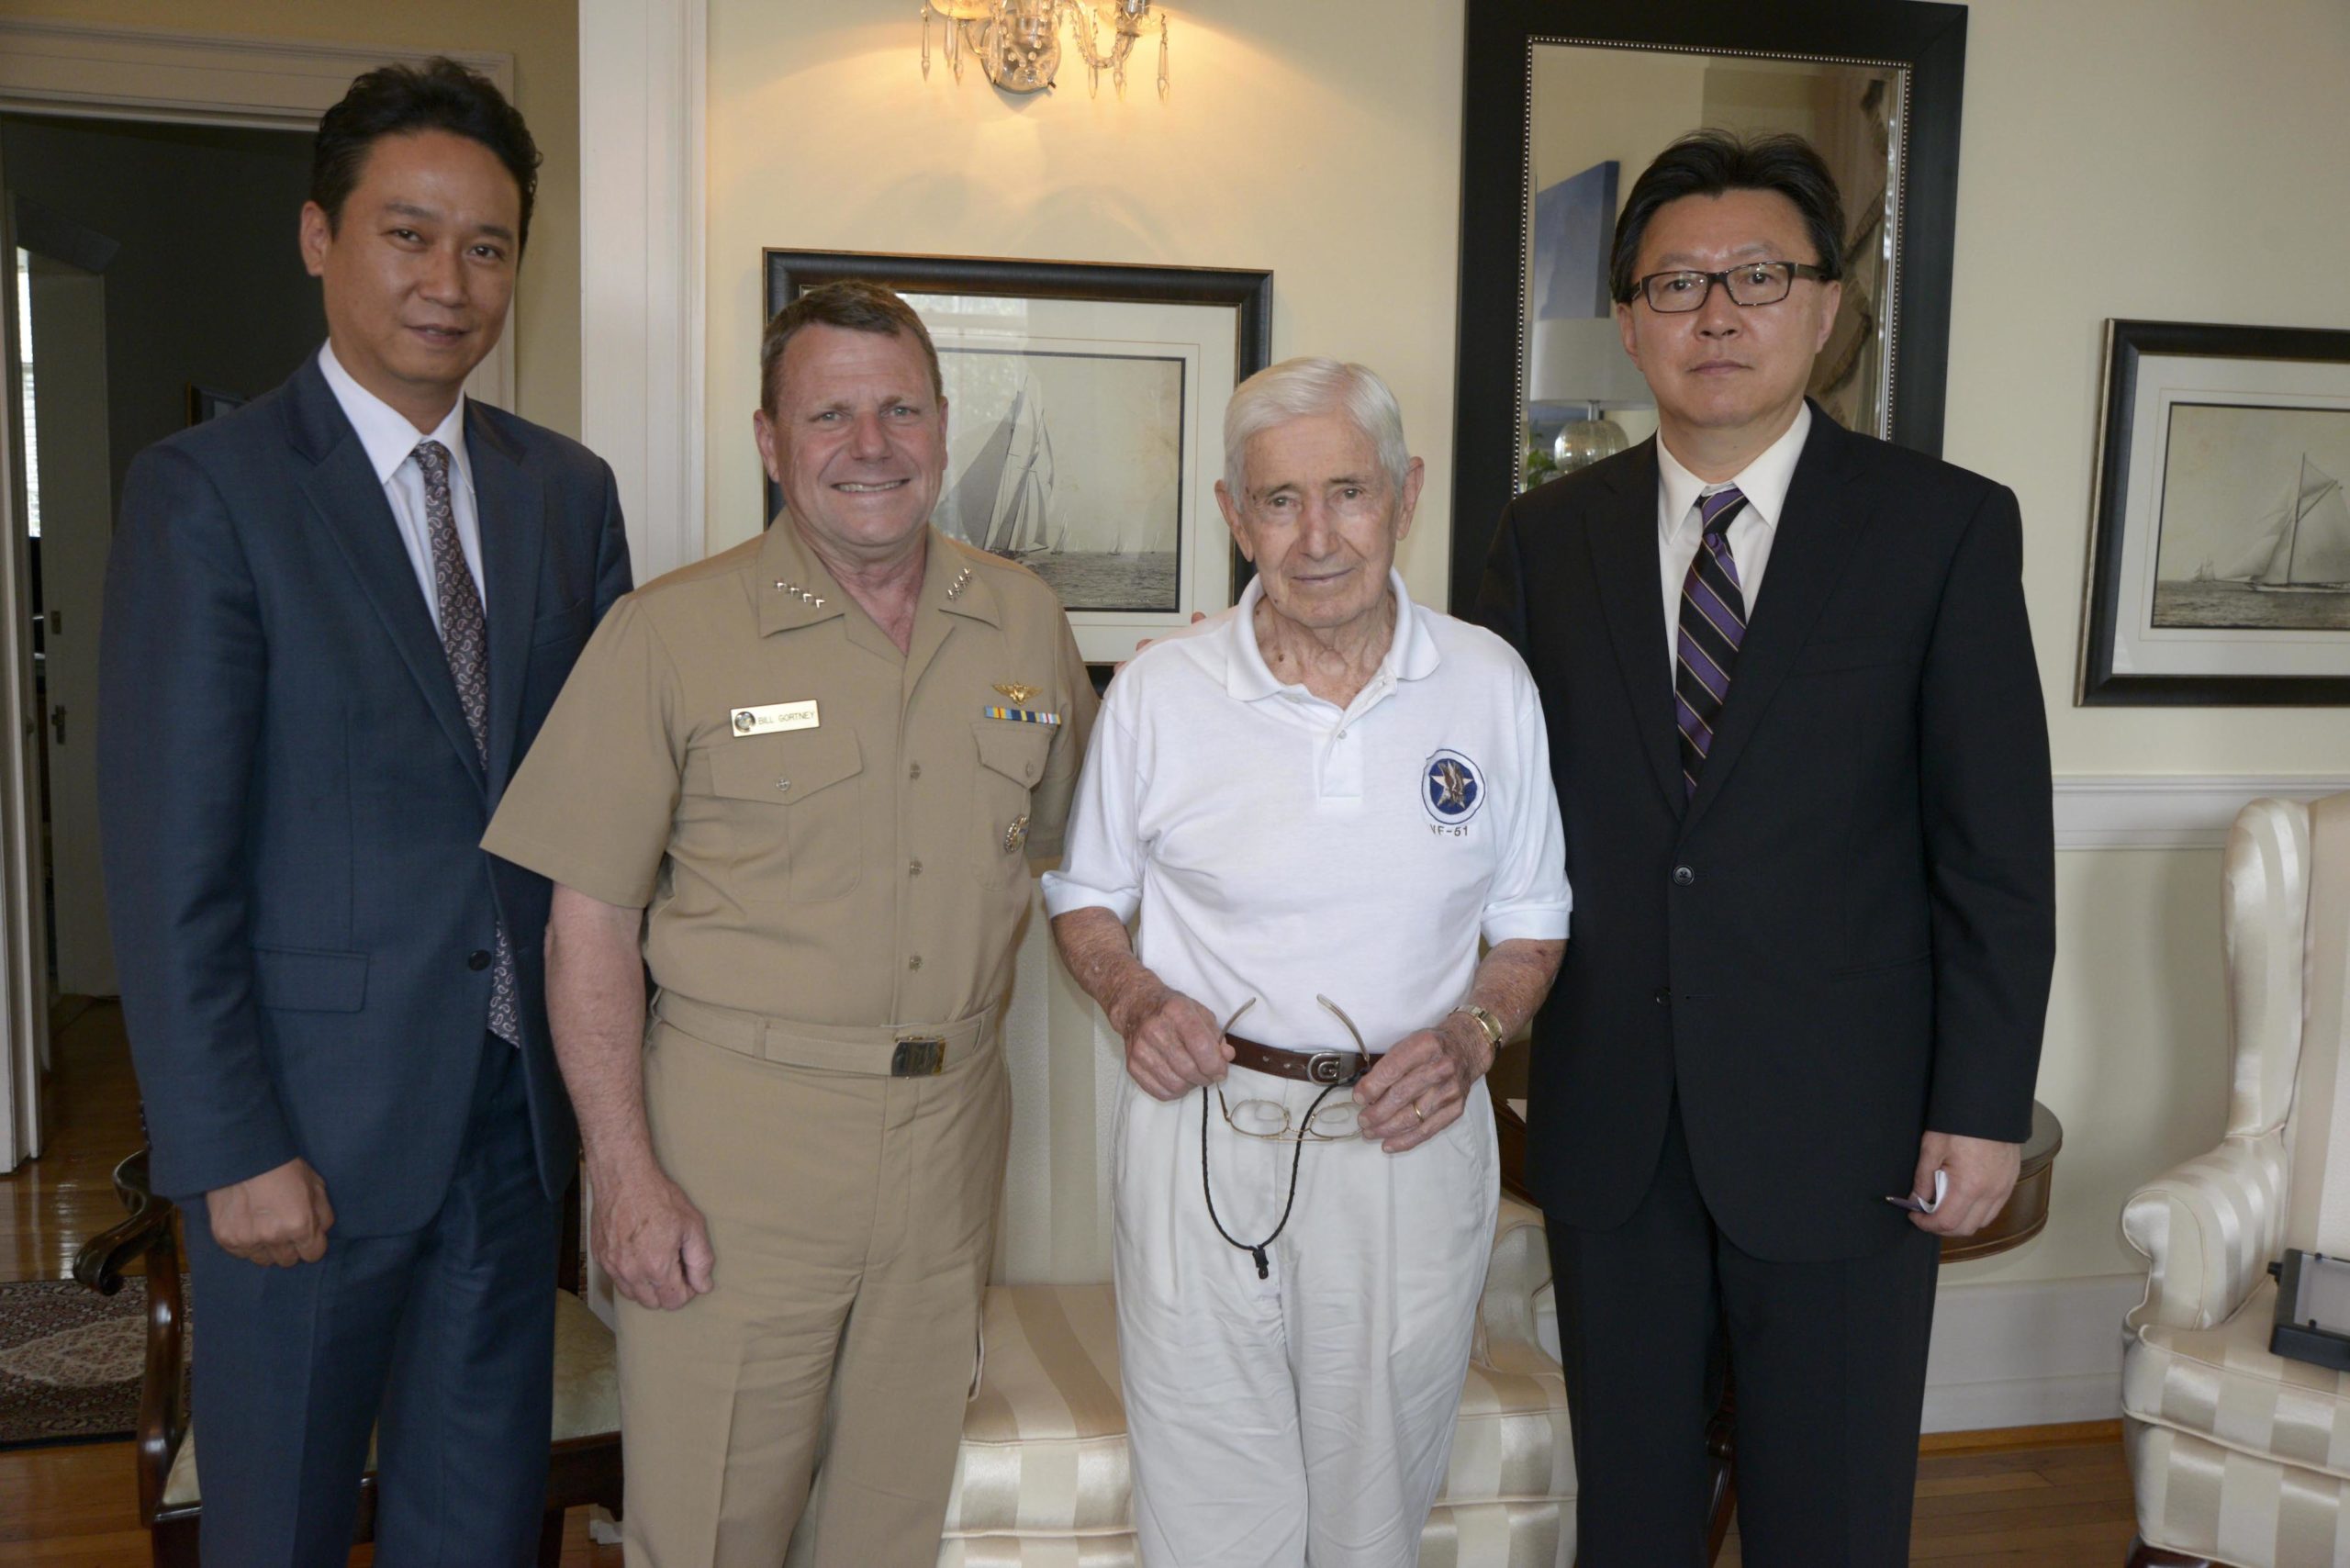 MPVA Officer Kim Ju Yong, Admiral William Gortney, Captain William Gortney, and President Han, Provided by Captain Jane Campbell, US Navy Fleet Forces, Norfolk VA on June 23, 2014